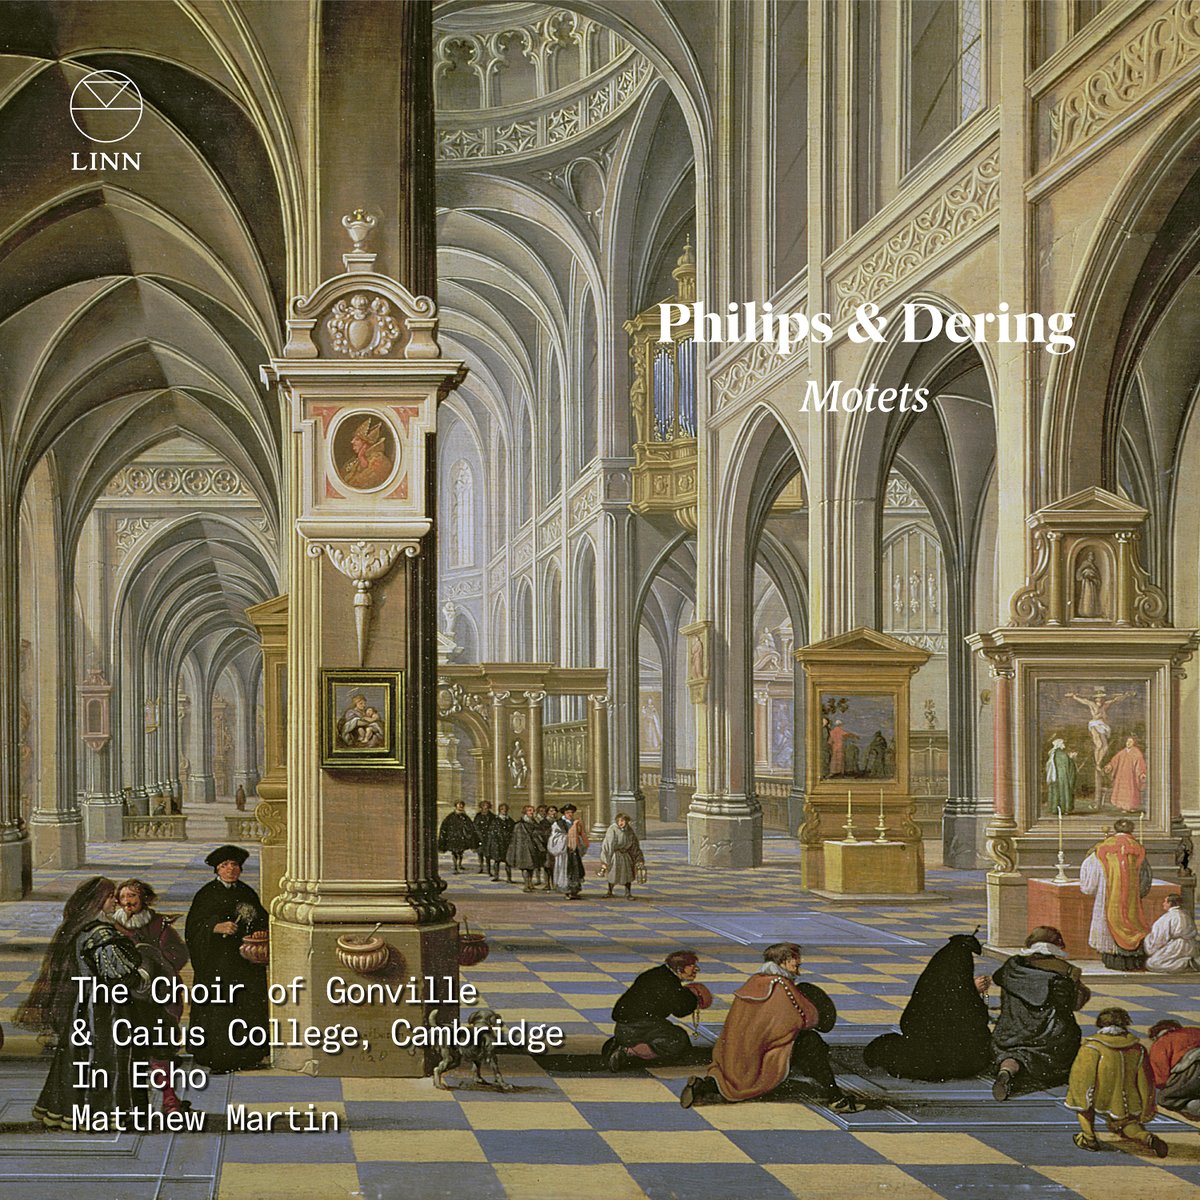 'The performances are first-rate...Collectors of sacred music from this period will definitely want this disc; cordially recommended.' Fanfare's latest issue recommends Philips & Dering: Motets by @CaiusCollegeCho & @matthewm76. ► Discover the album: lnk.to/PhilipsDeringM…